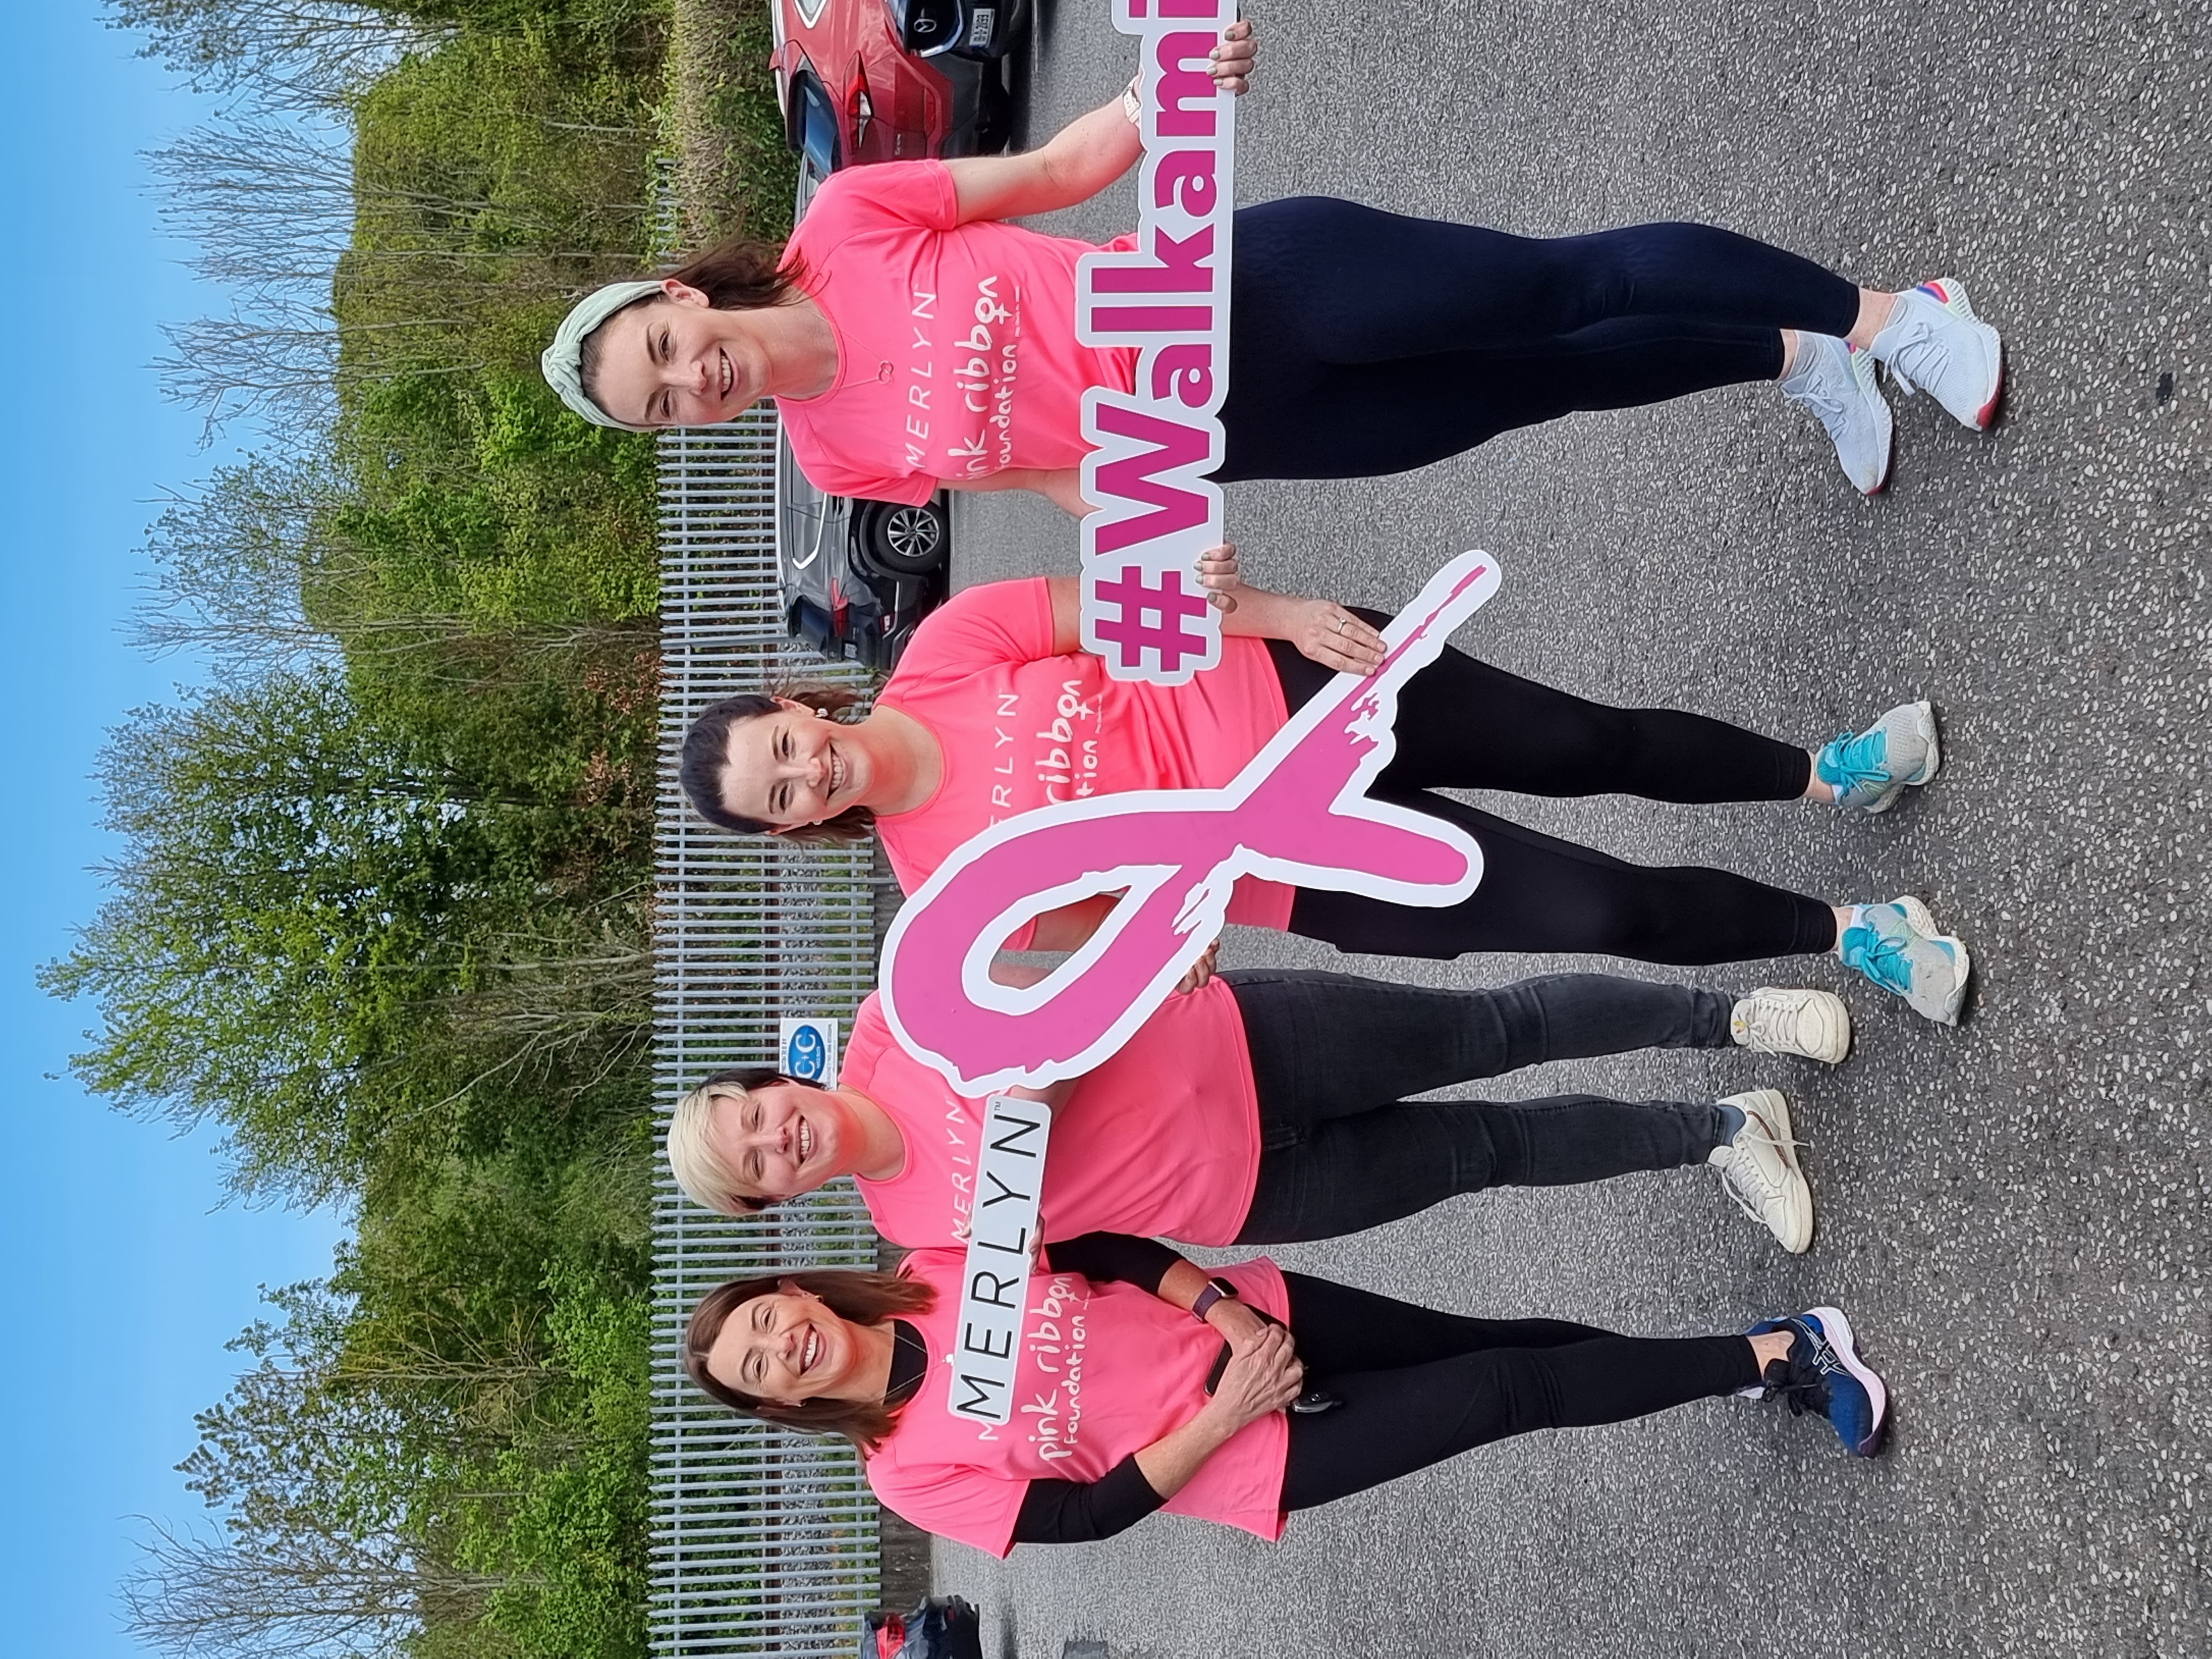 MERLYN’s support makes miles of difference for the Pink Ribbon Foundation